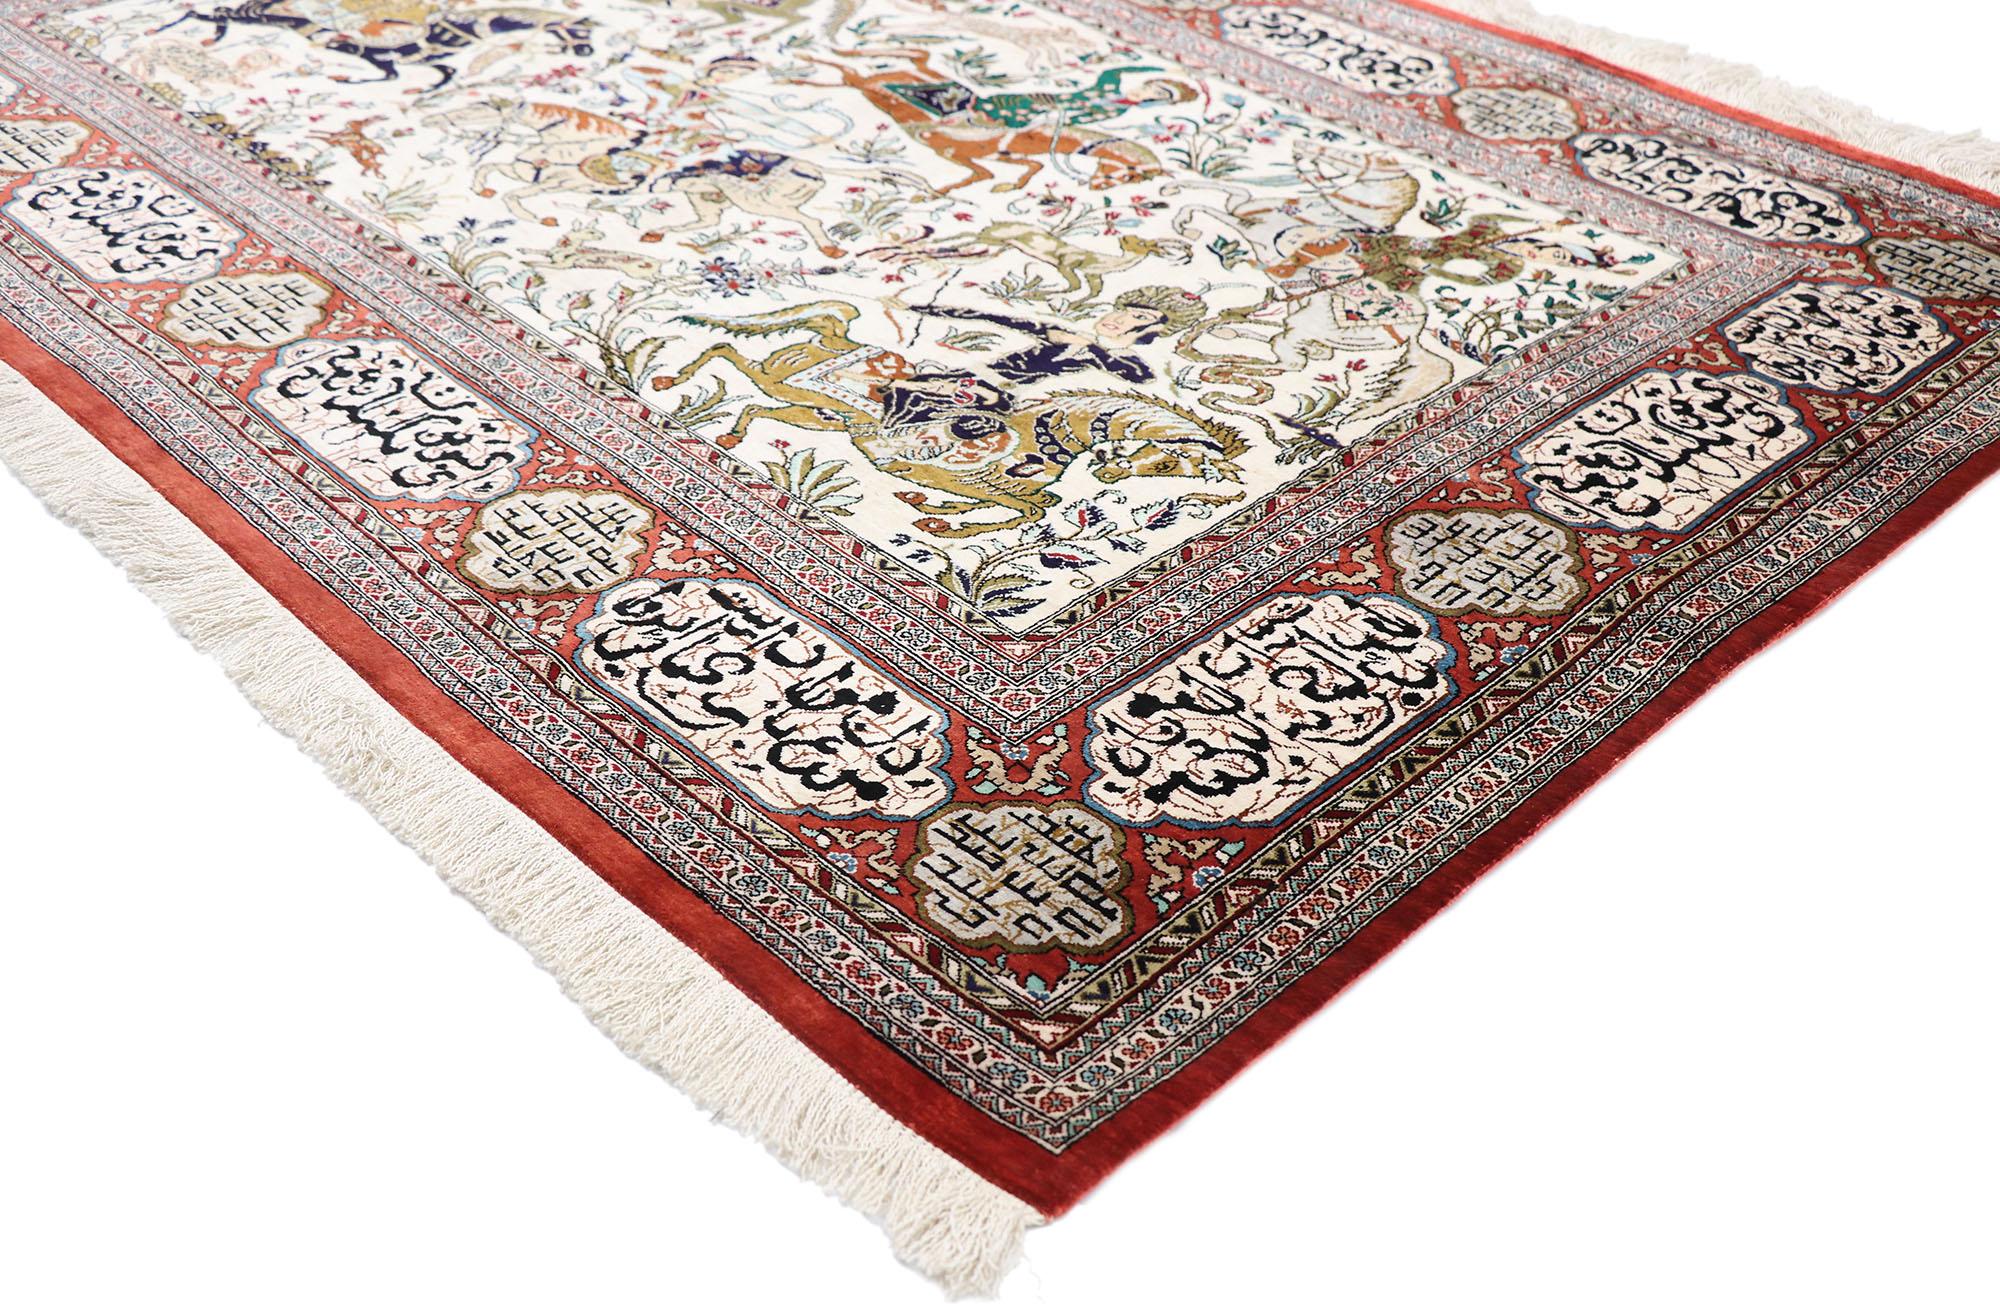 77865 Vintage Persian Silk Qum Hunting rug with Medieval Style 03'04 x 05'00. Drawing inspiration from King Henry VI of England and Medieval style, this hand knotted wool vintage Persian Qum rug features a lively pictorial hunting scene against a